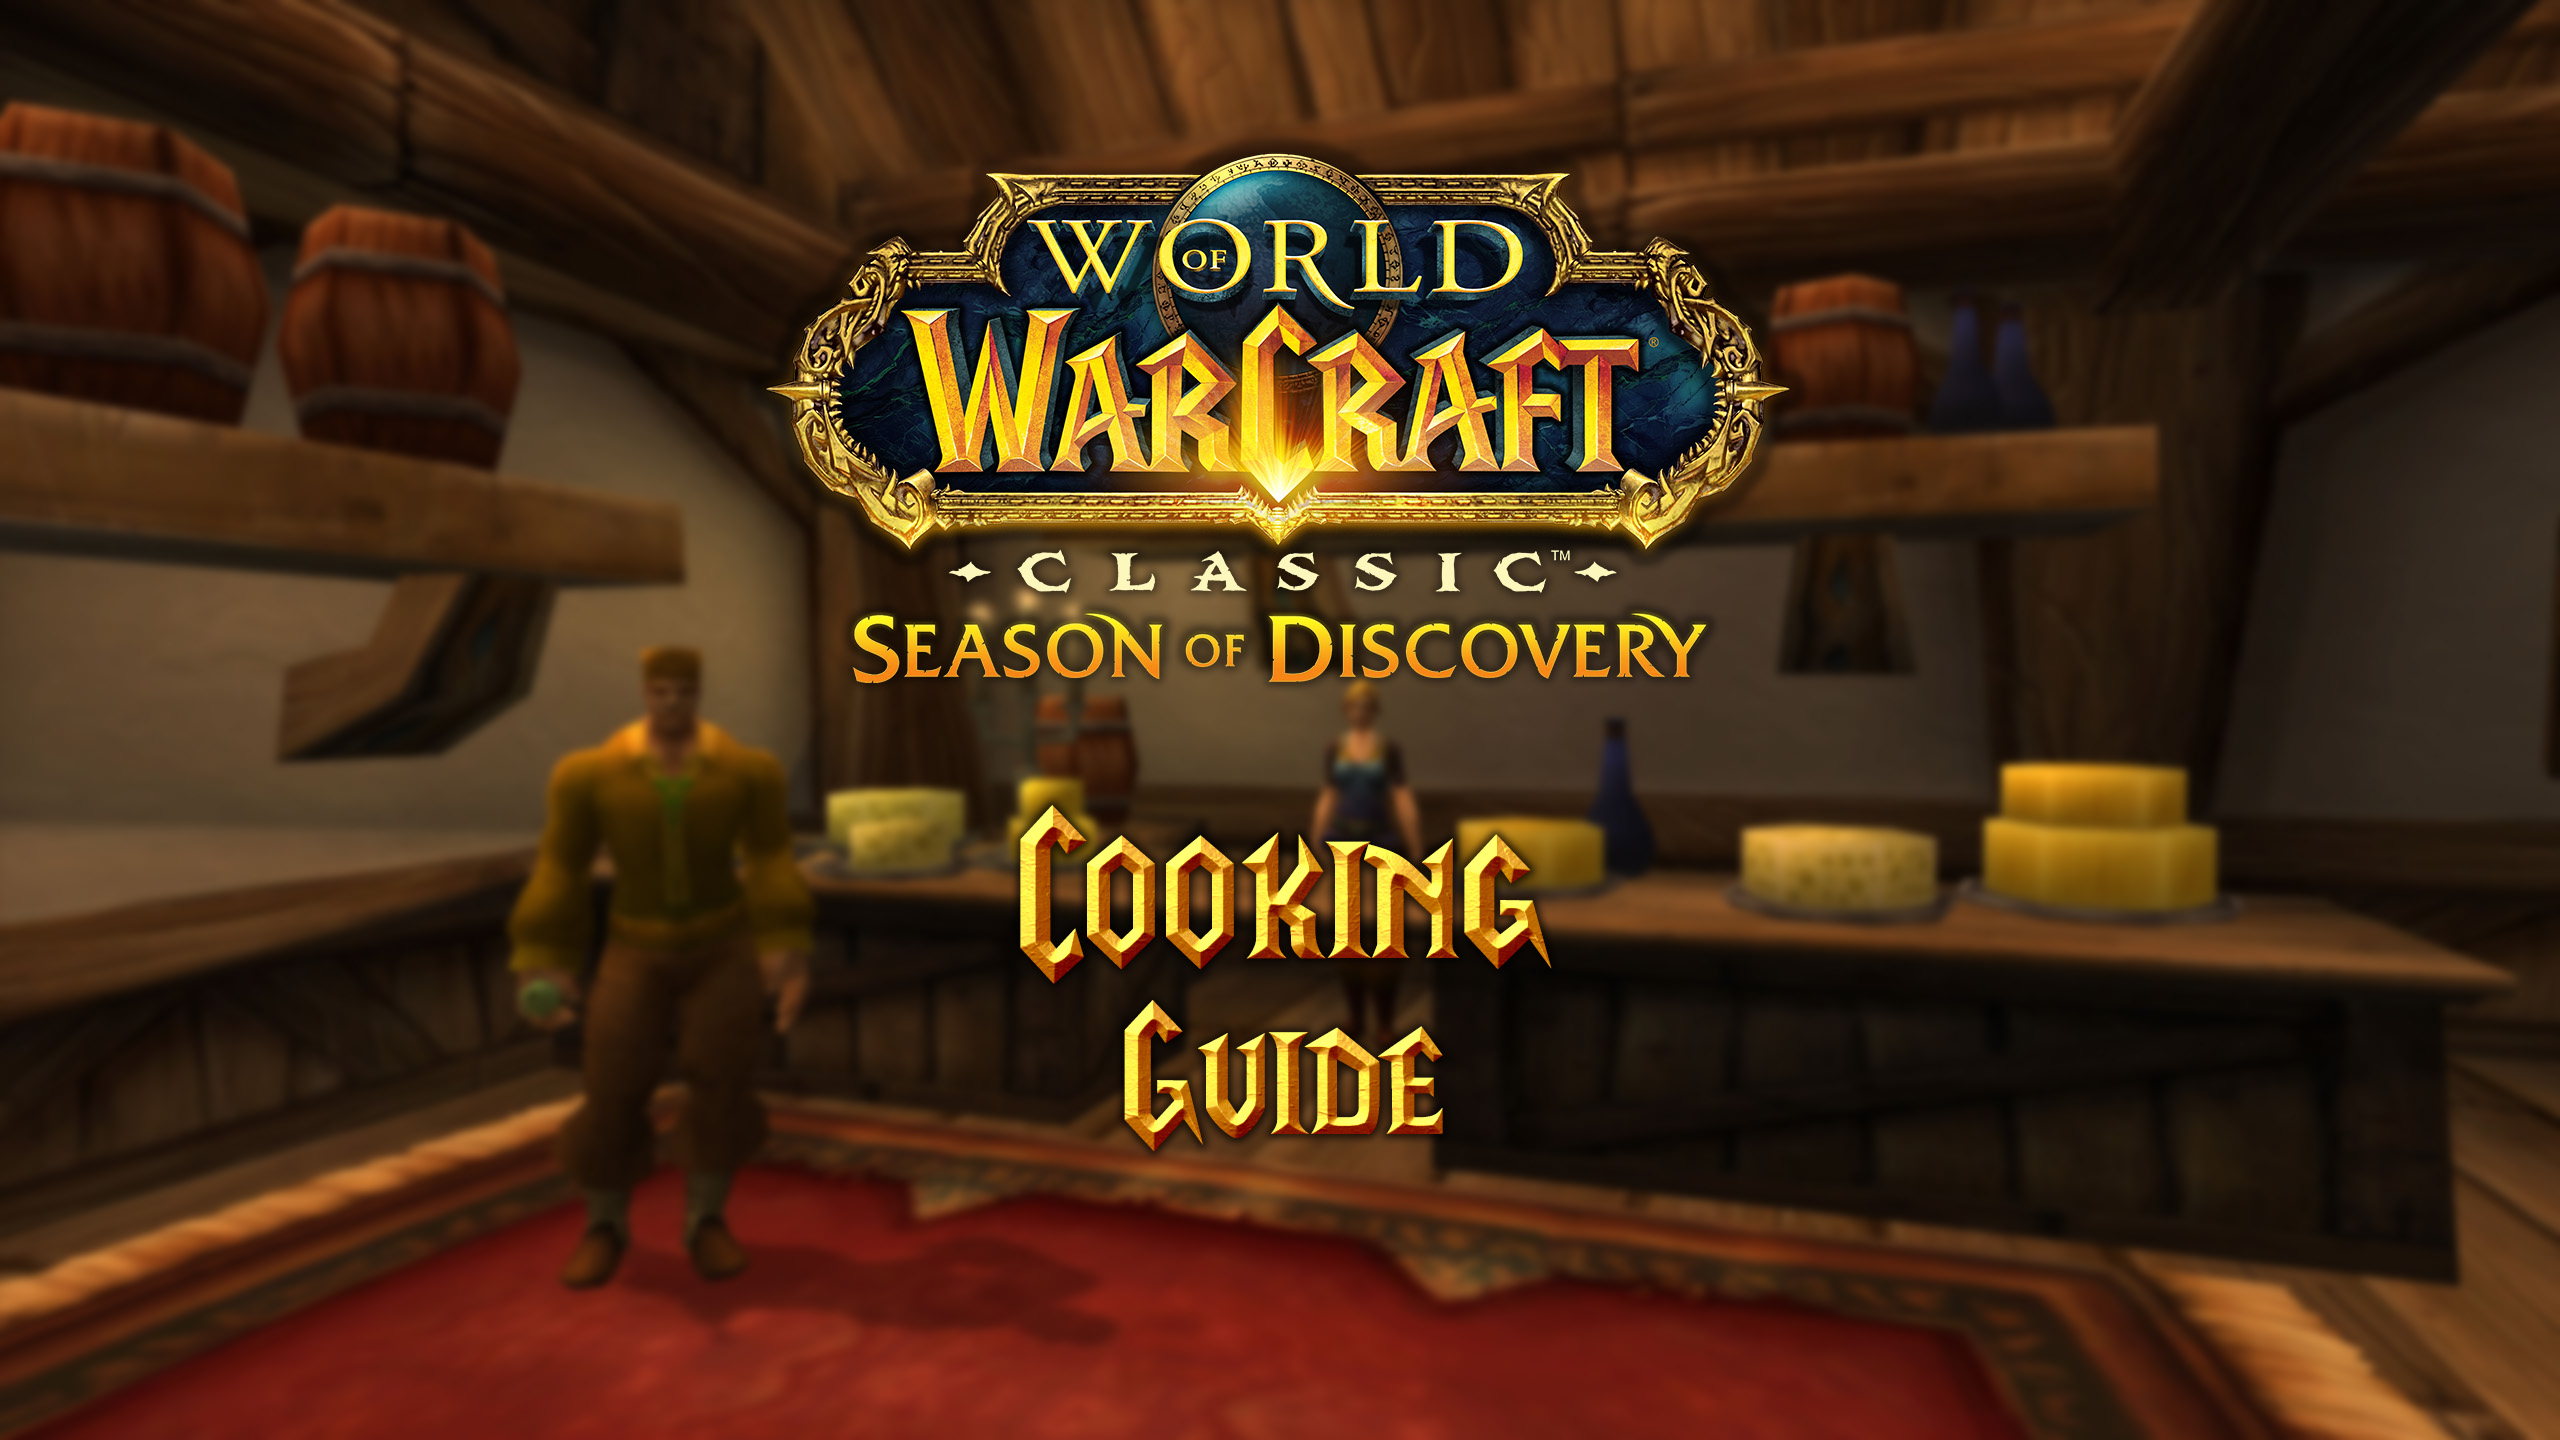 Cooking Guide for Season of Discovery (SoD)